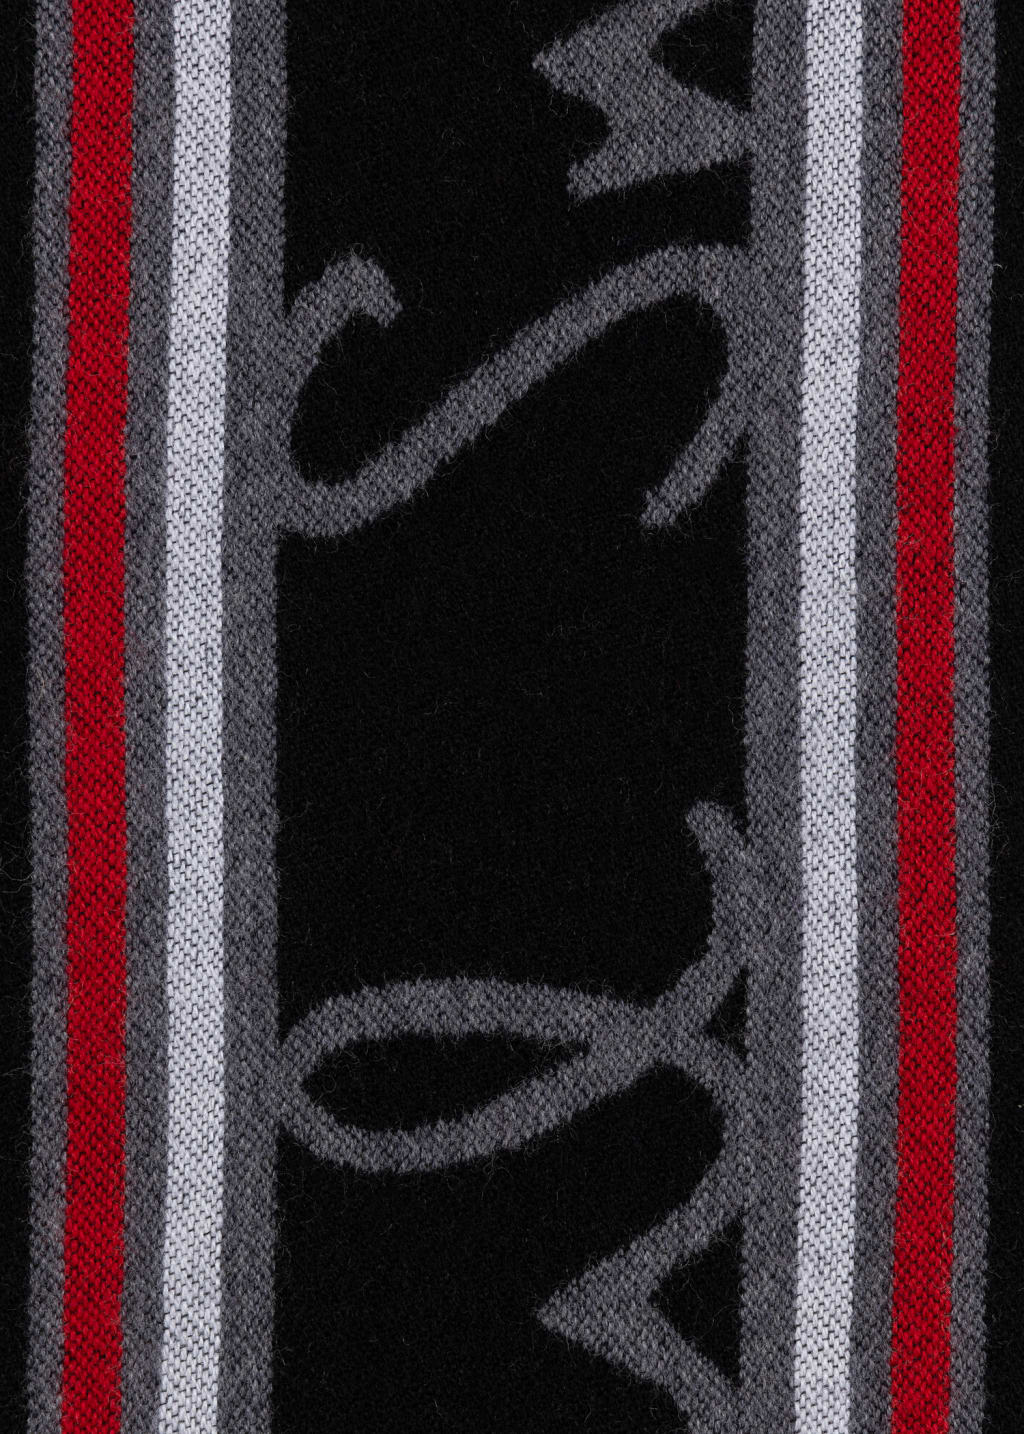 Detail View - Paul Smith & Manchester United - Stripe Logo Wool Scarf Paul Smith